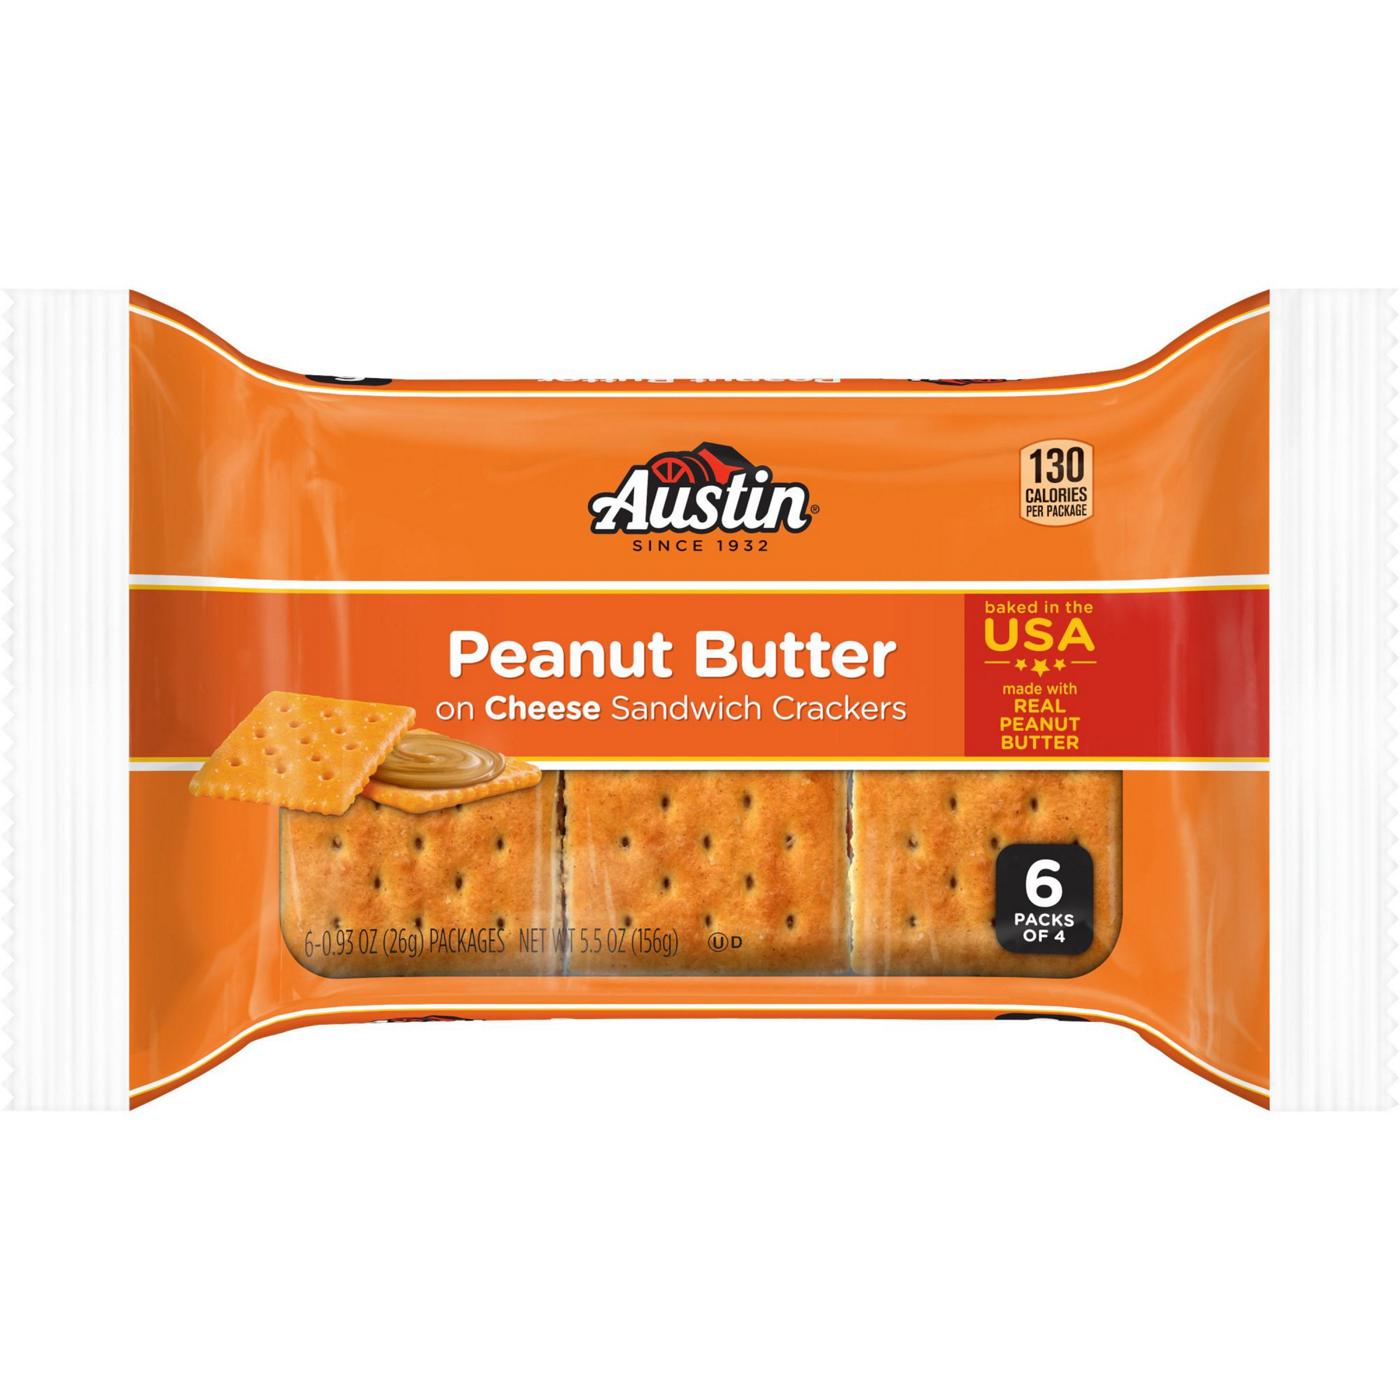 Austin Peanut Butter on Cheese Sandwich Crackers; image 1 of 3